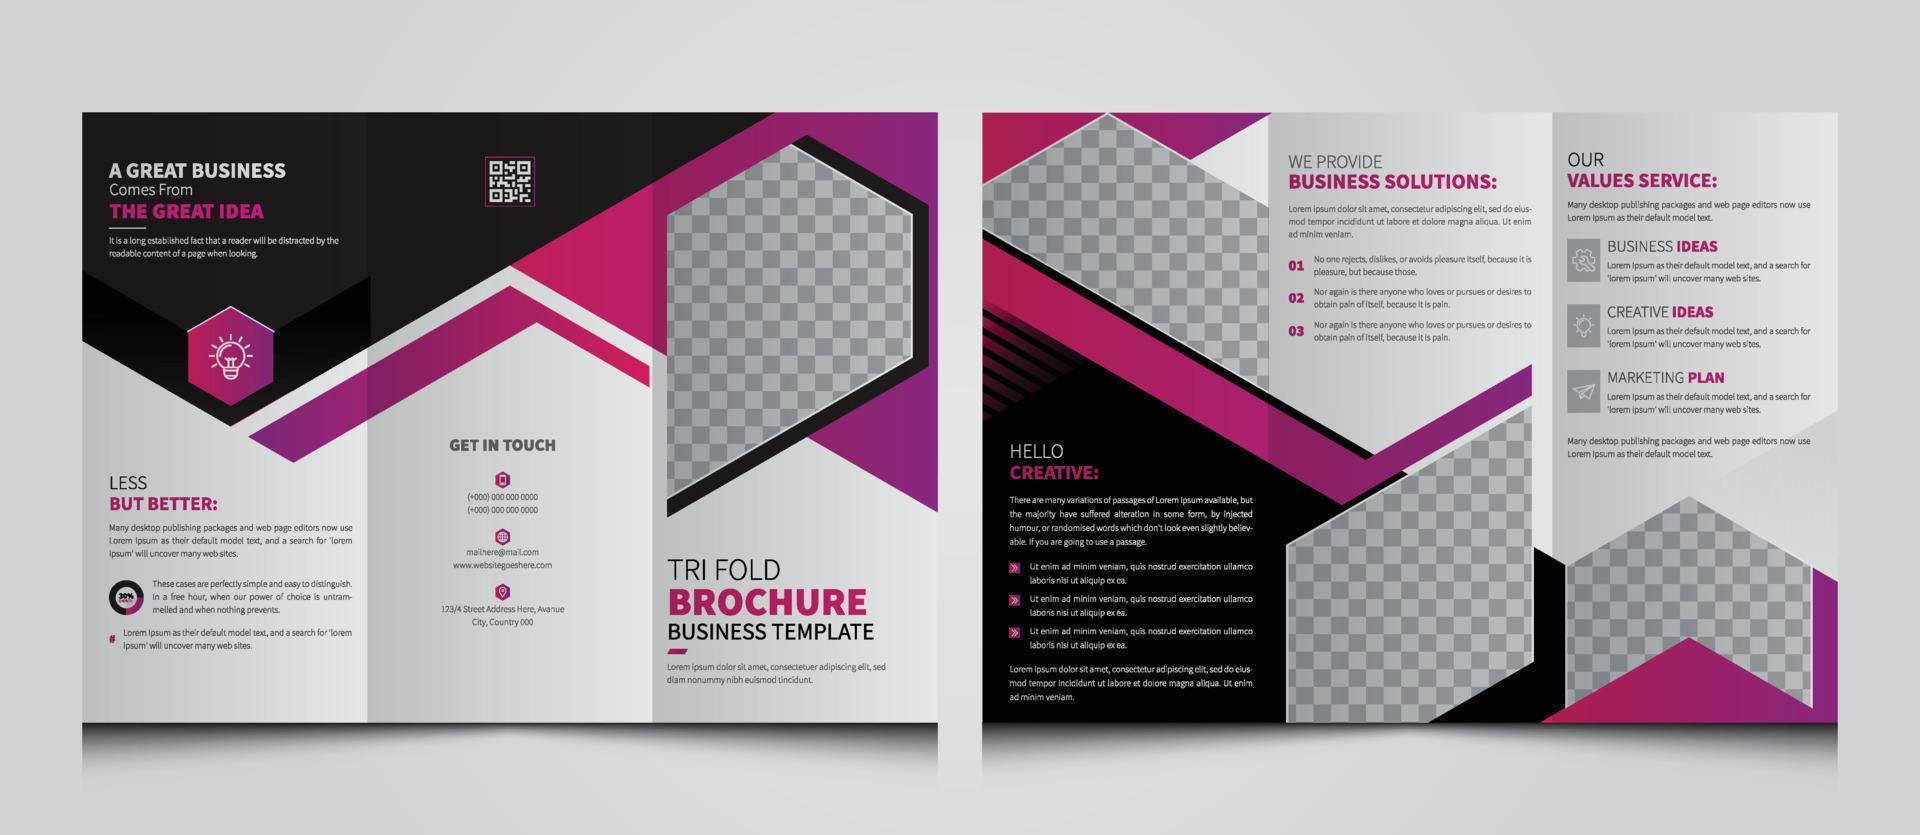 Creative and Modern Corporate Agency Trifold Print Ready Brochure. Business Three Fold Brochure Template. vector